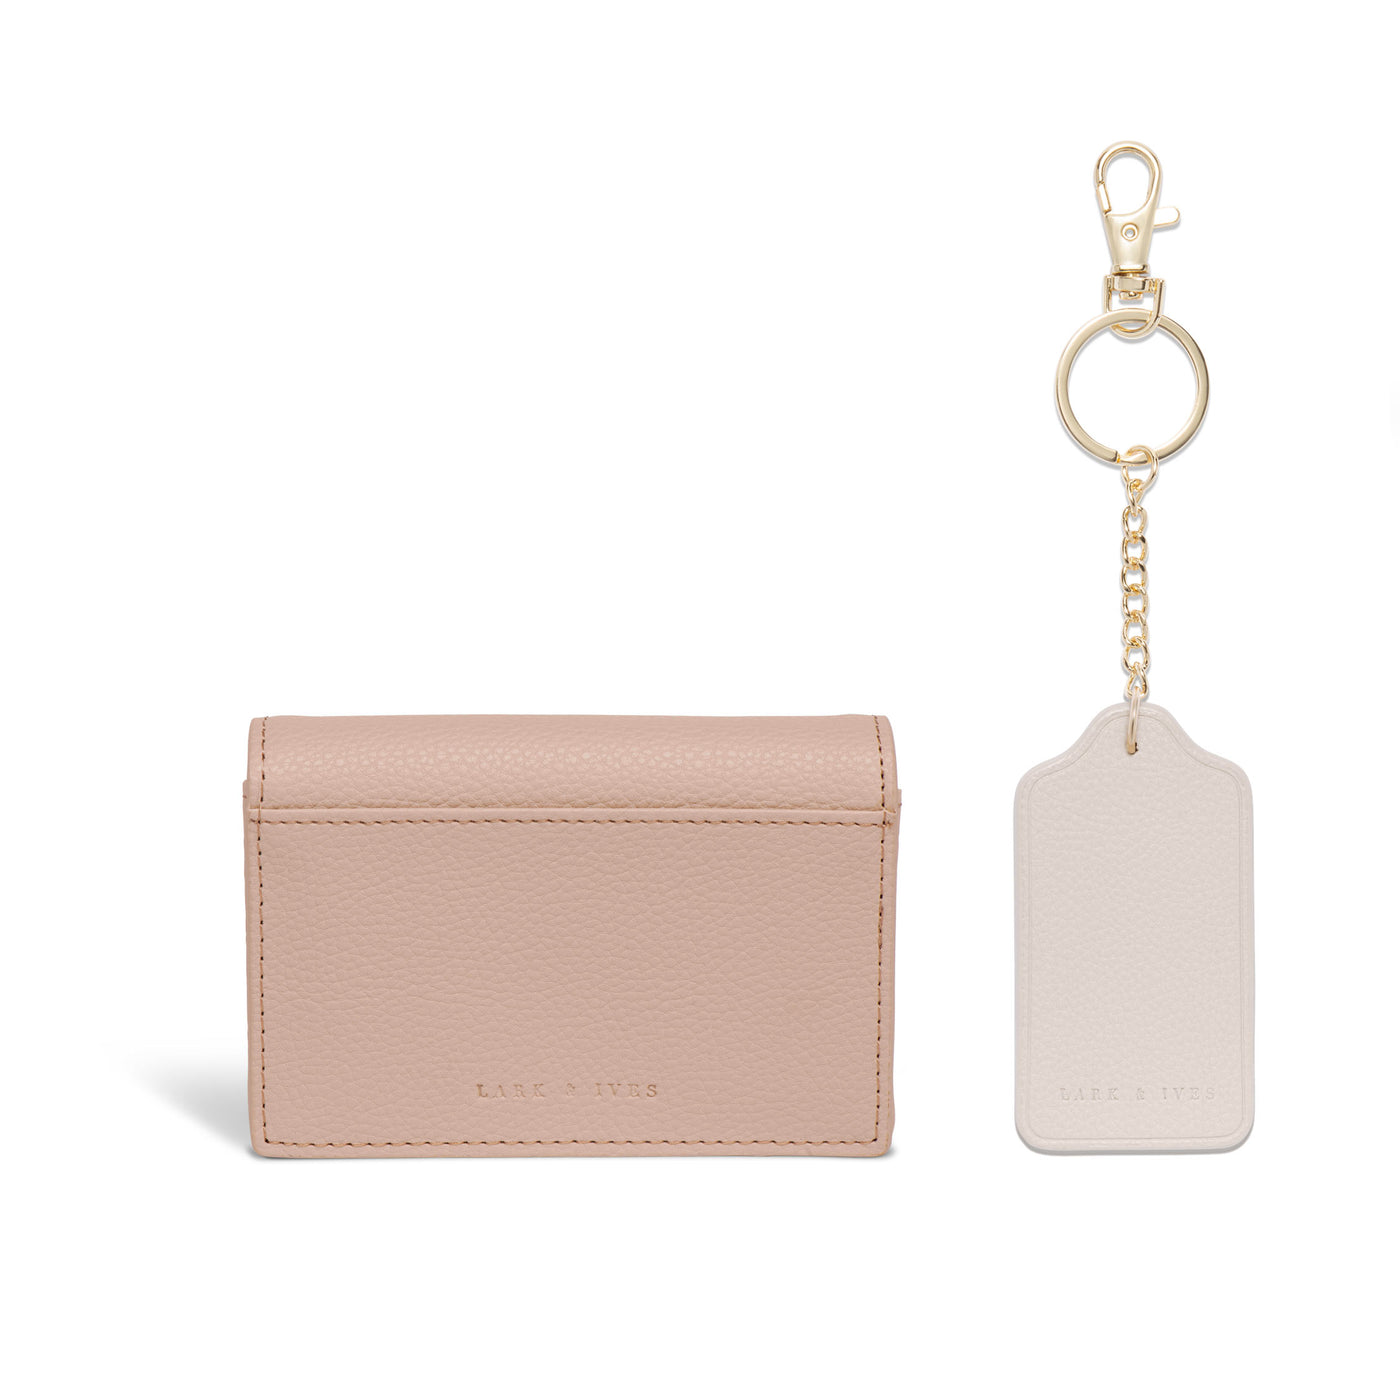 Lark and Ives / Vegan Leather Accessories / Small Accessories / Wallet / Mini Wallet / Card Case / Card Holder / Button snap closure / Fold Wallet / Tag Keychain / Keychain / Key Holder / Nude Pink Card Case and Light Beige Keychain